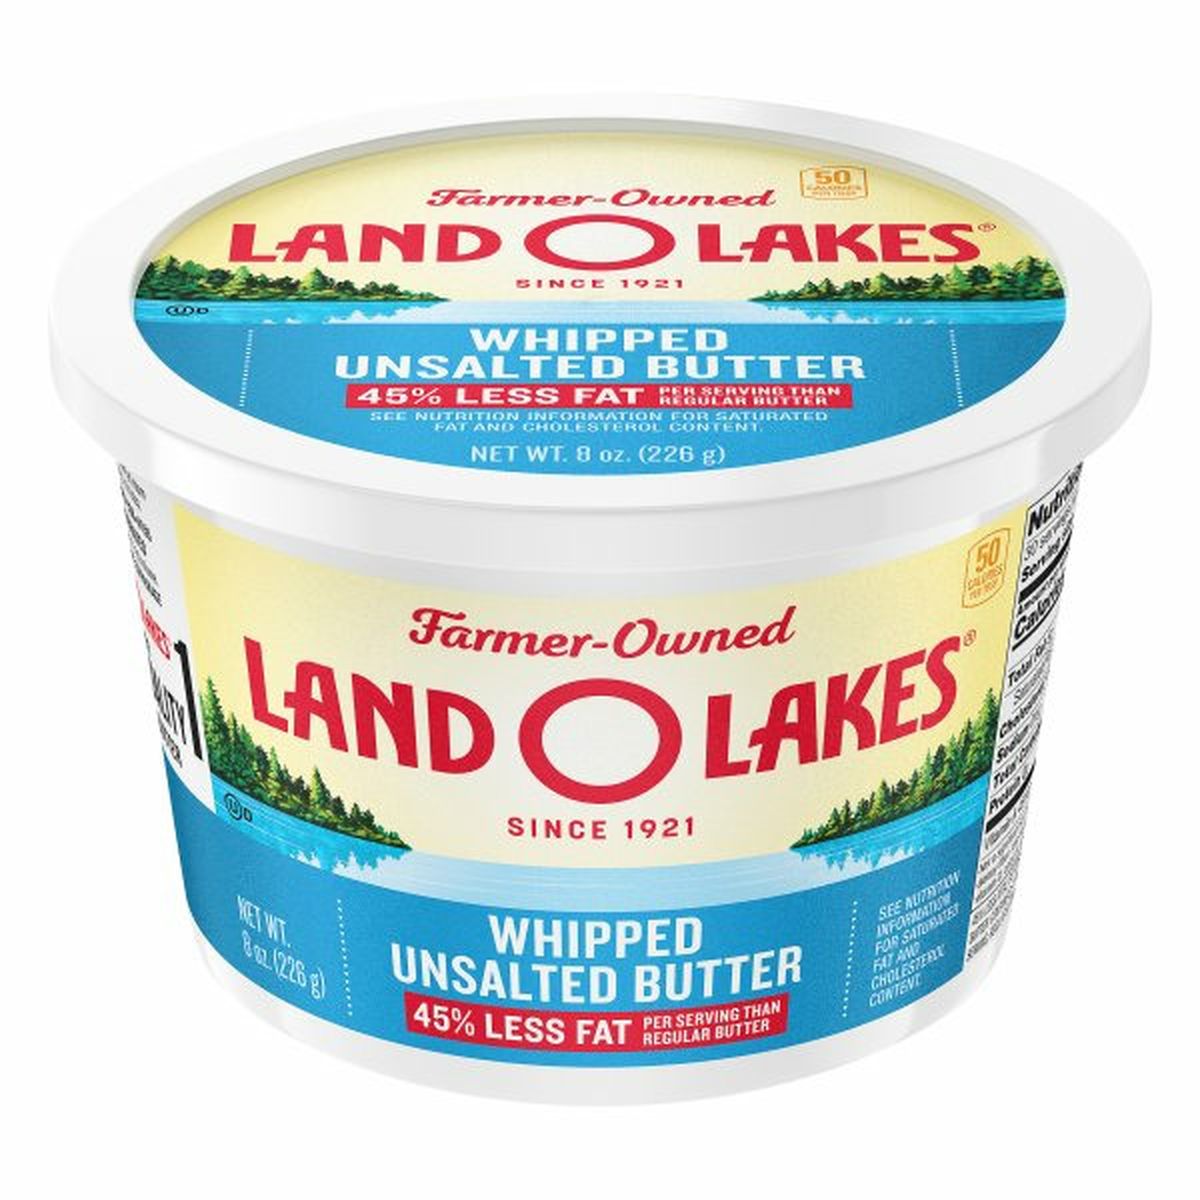 Calories in Land O Lakes Whipped Butter, Unsalted